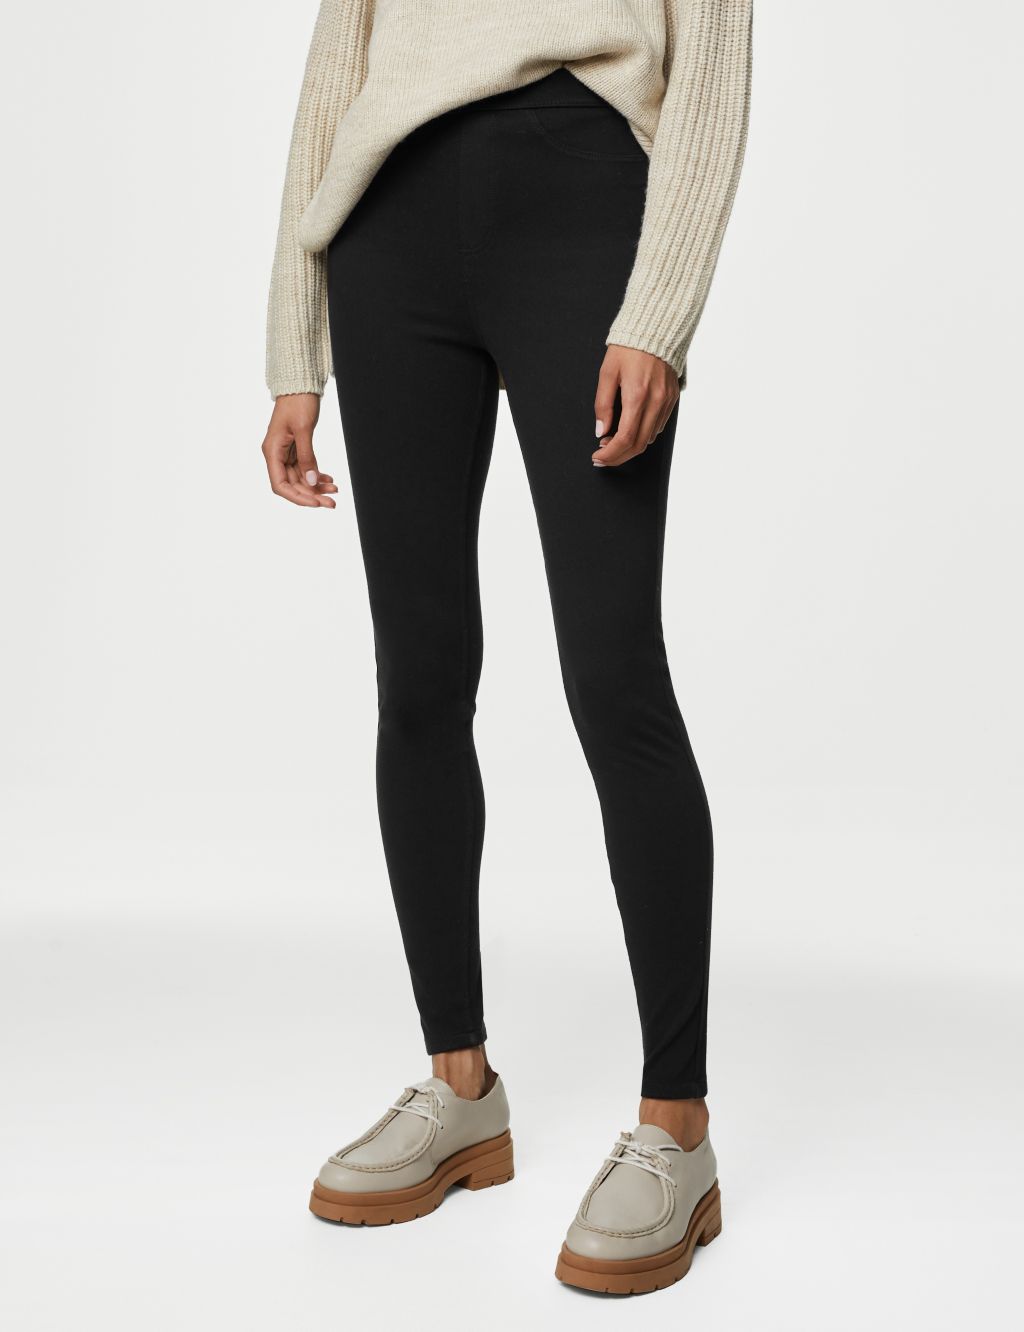 Cosy High Waisted Jeggings image 3